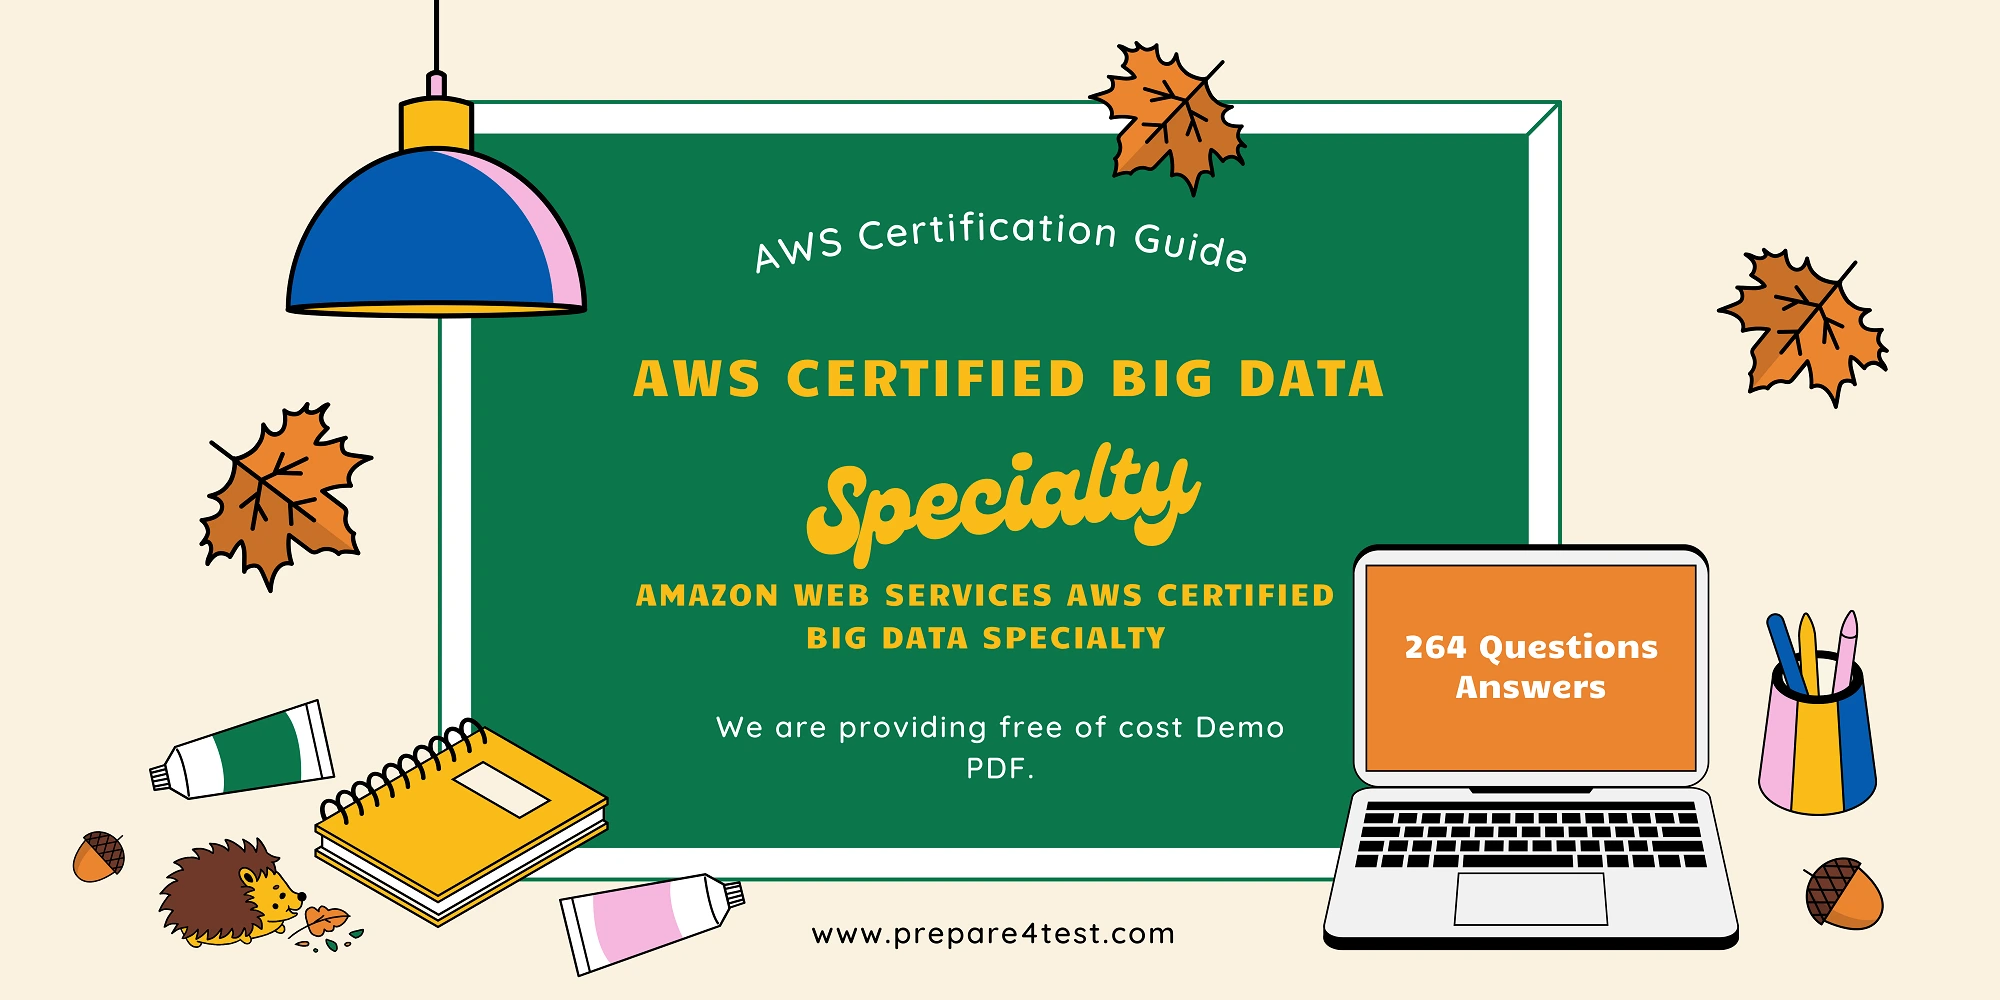 Amazon Web Services AWS Certified Big Data Specialty